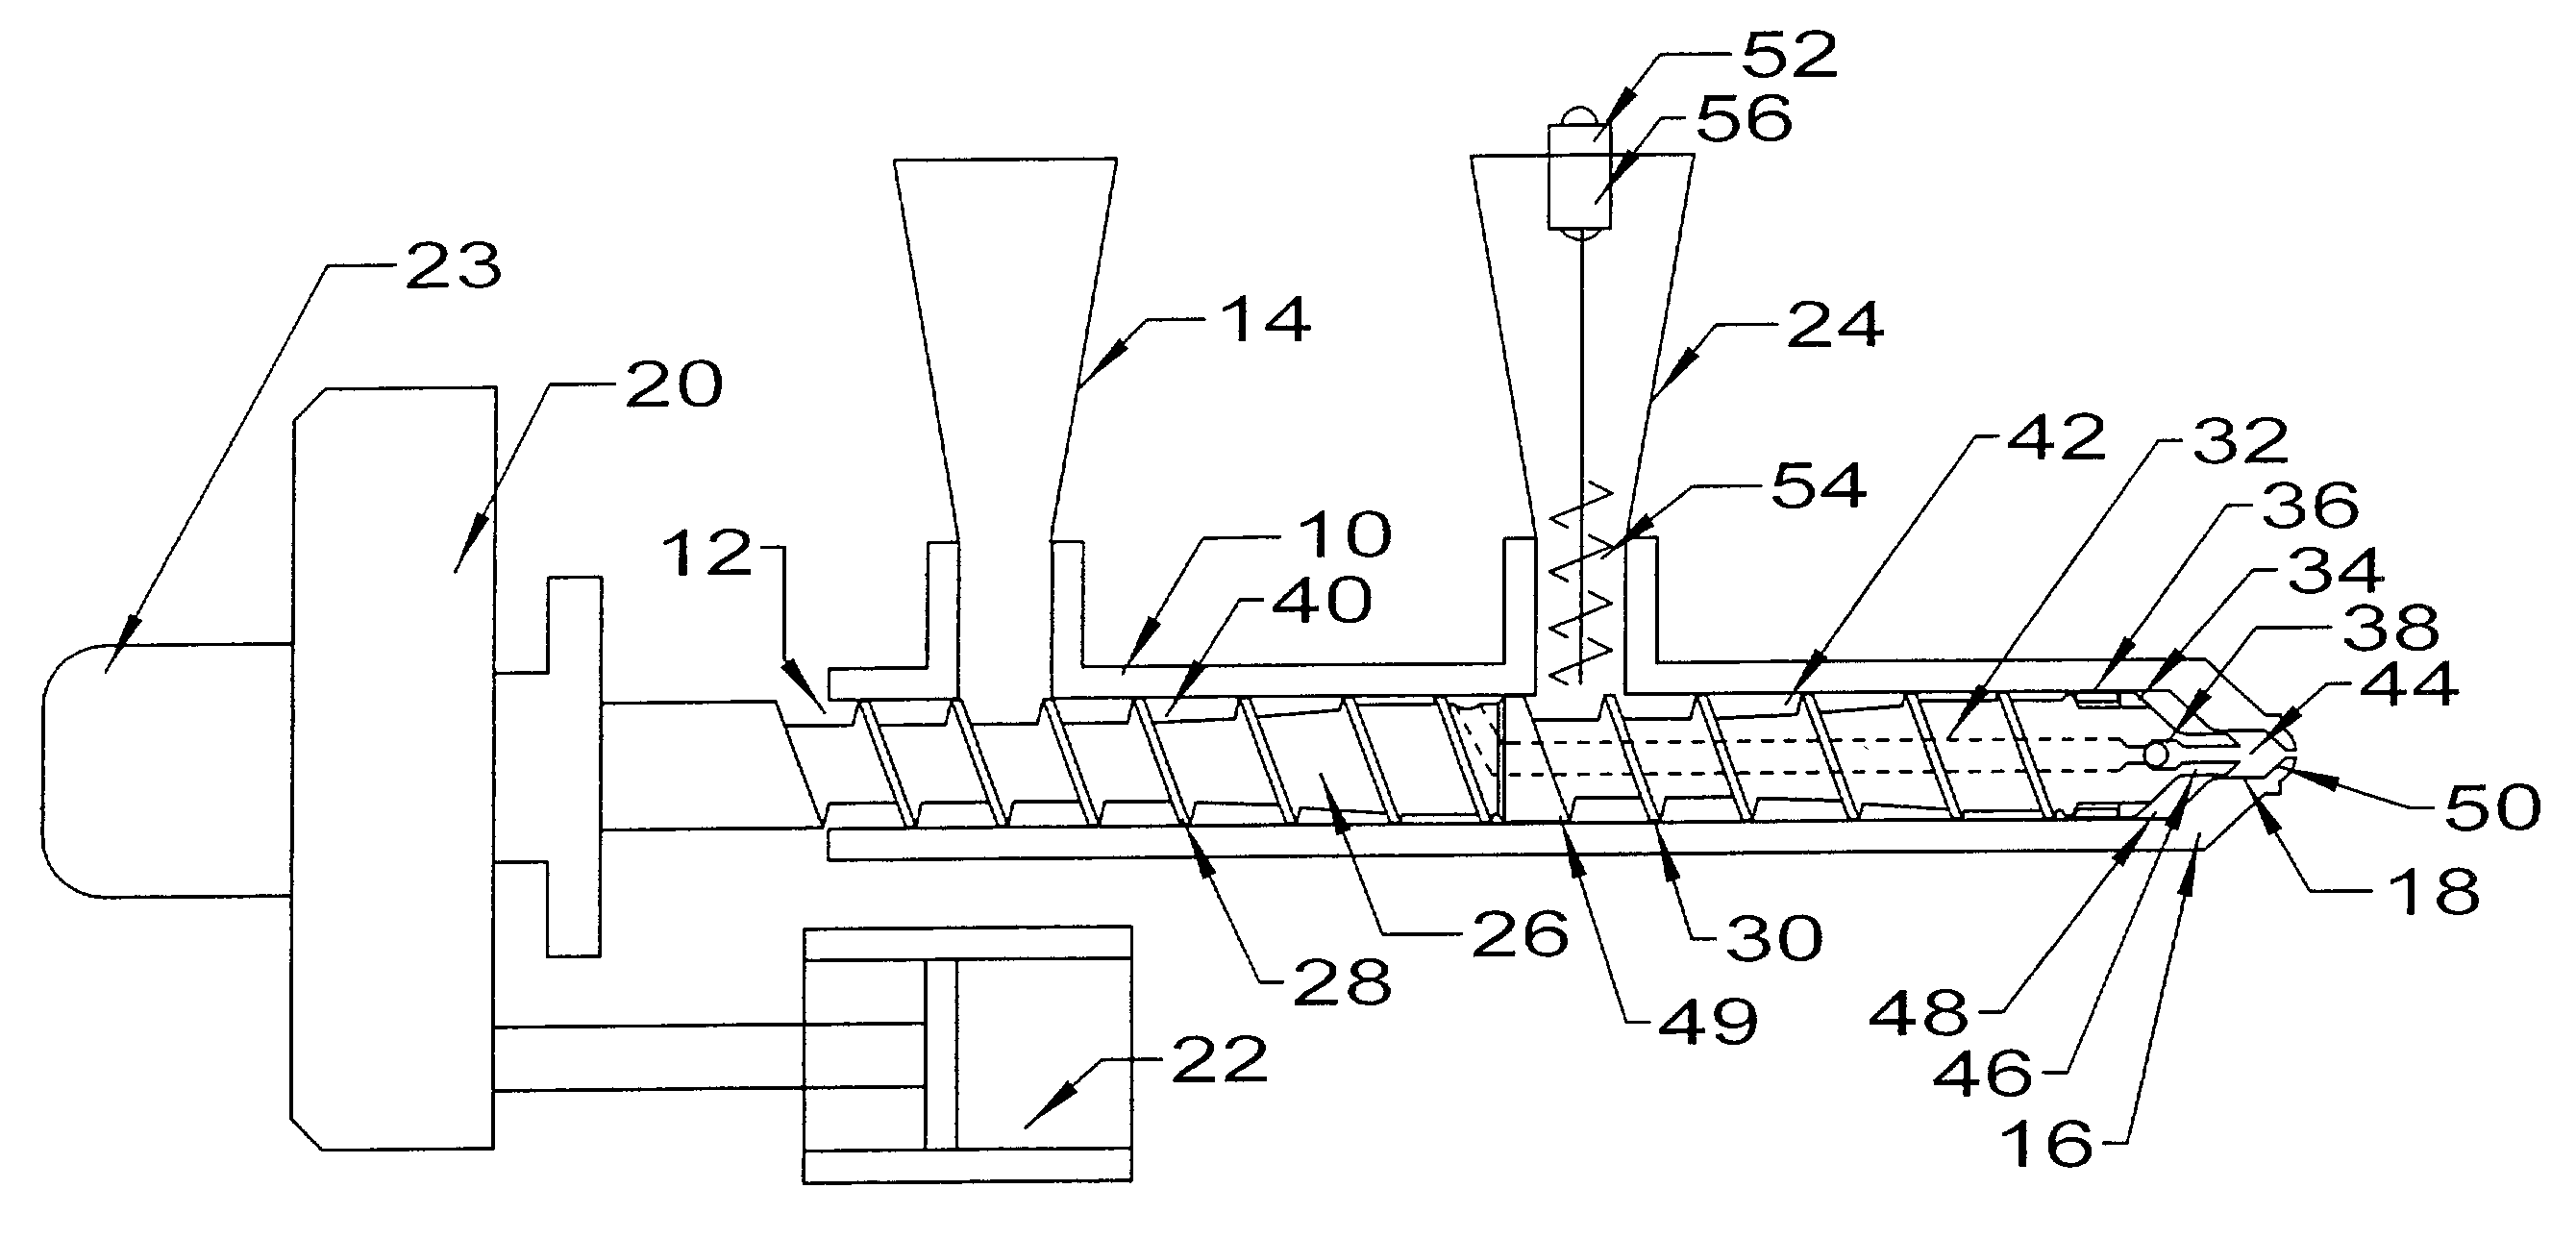 Apparatus for injection molding multilayered articles